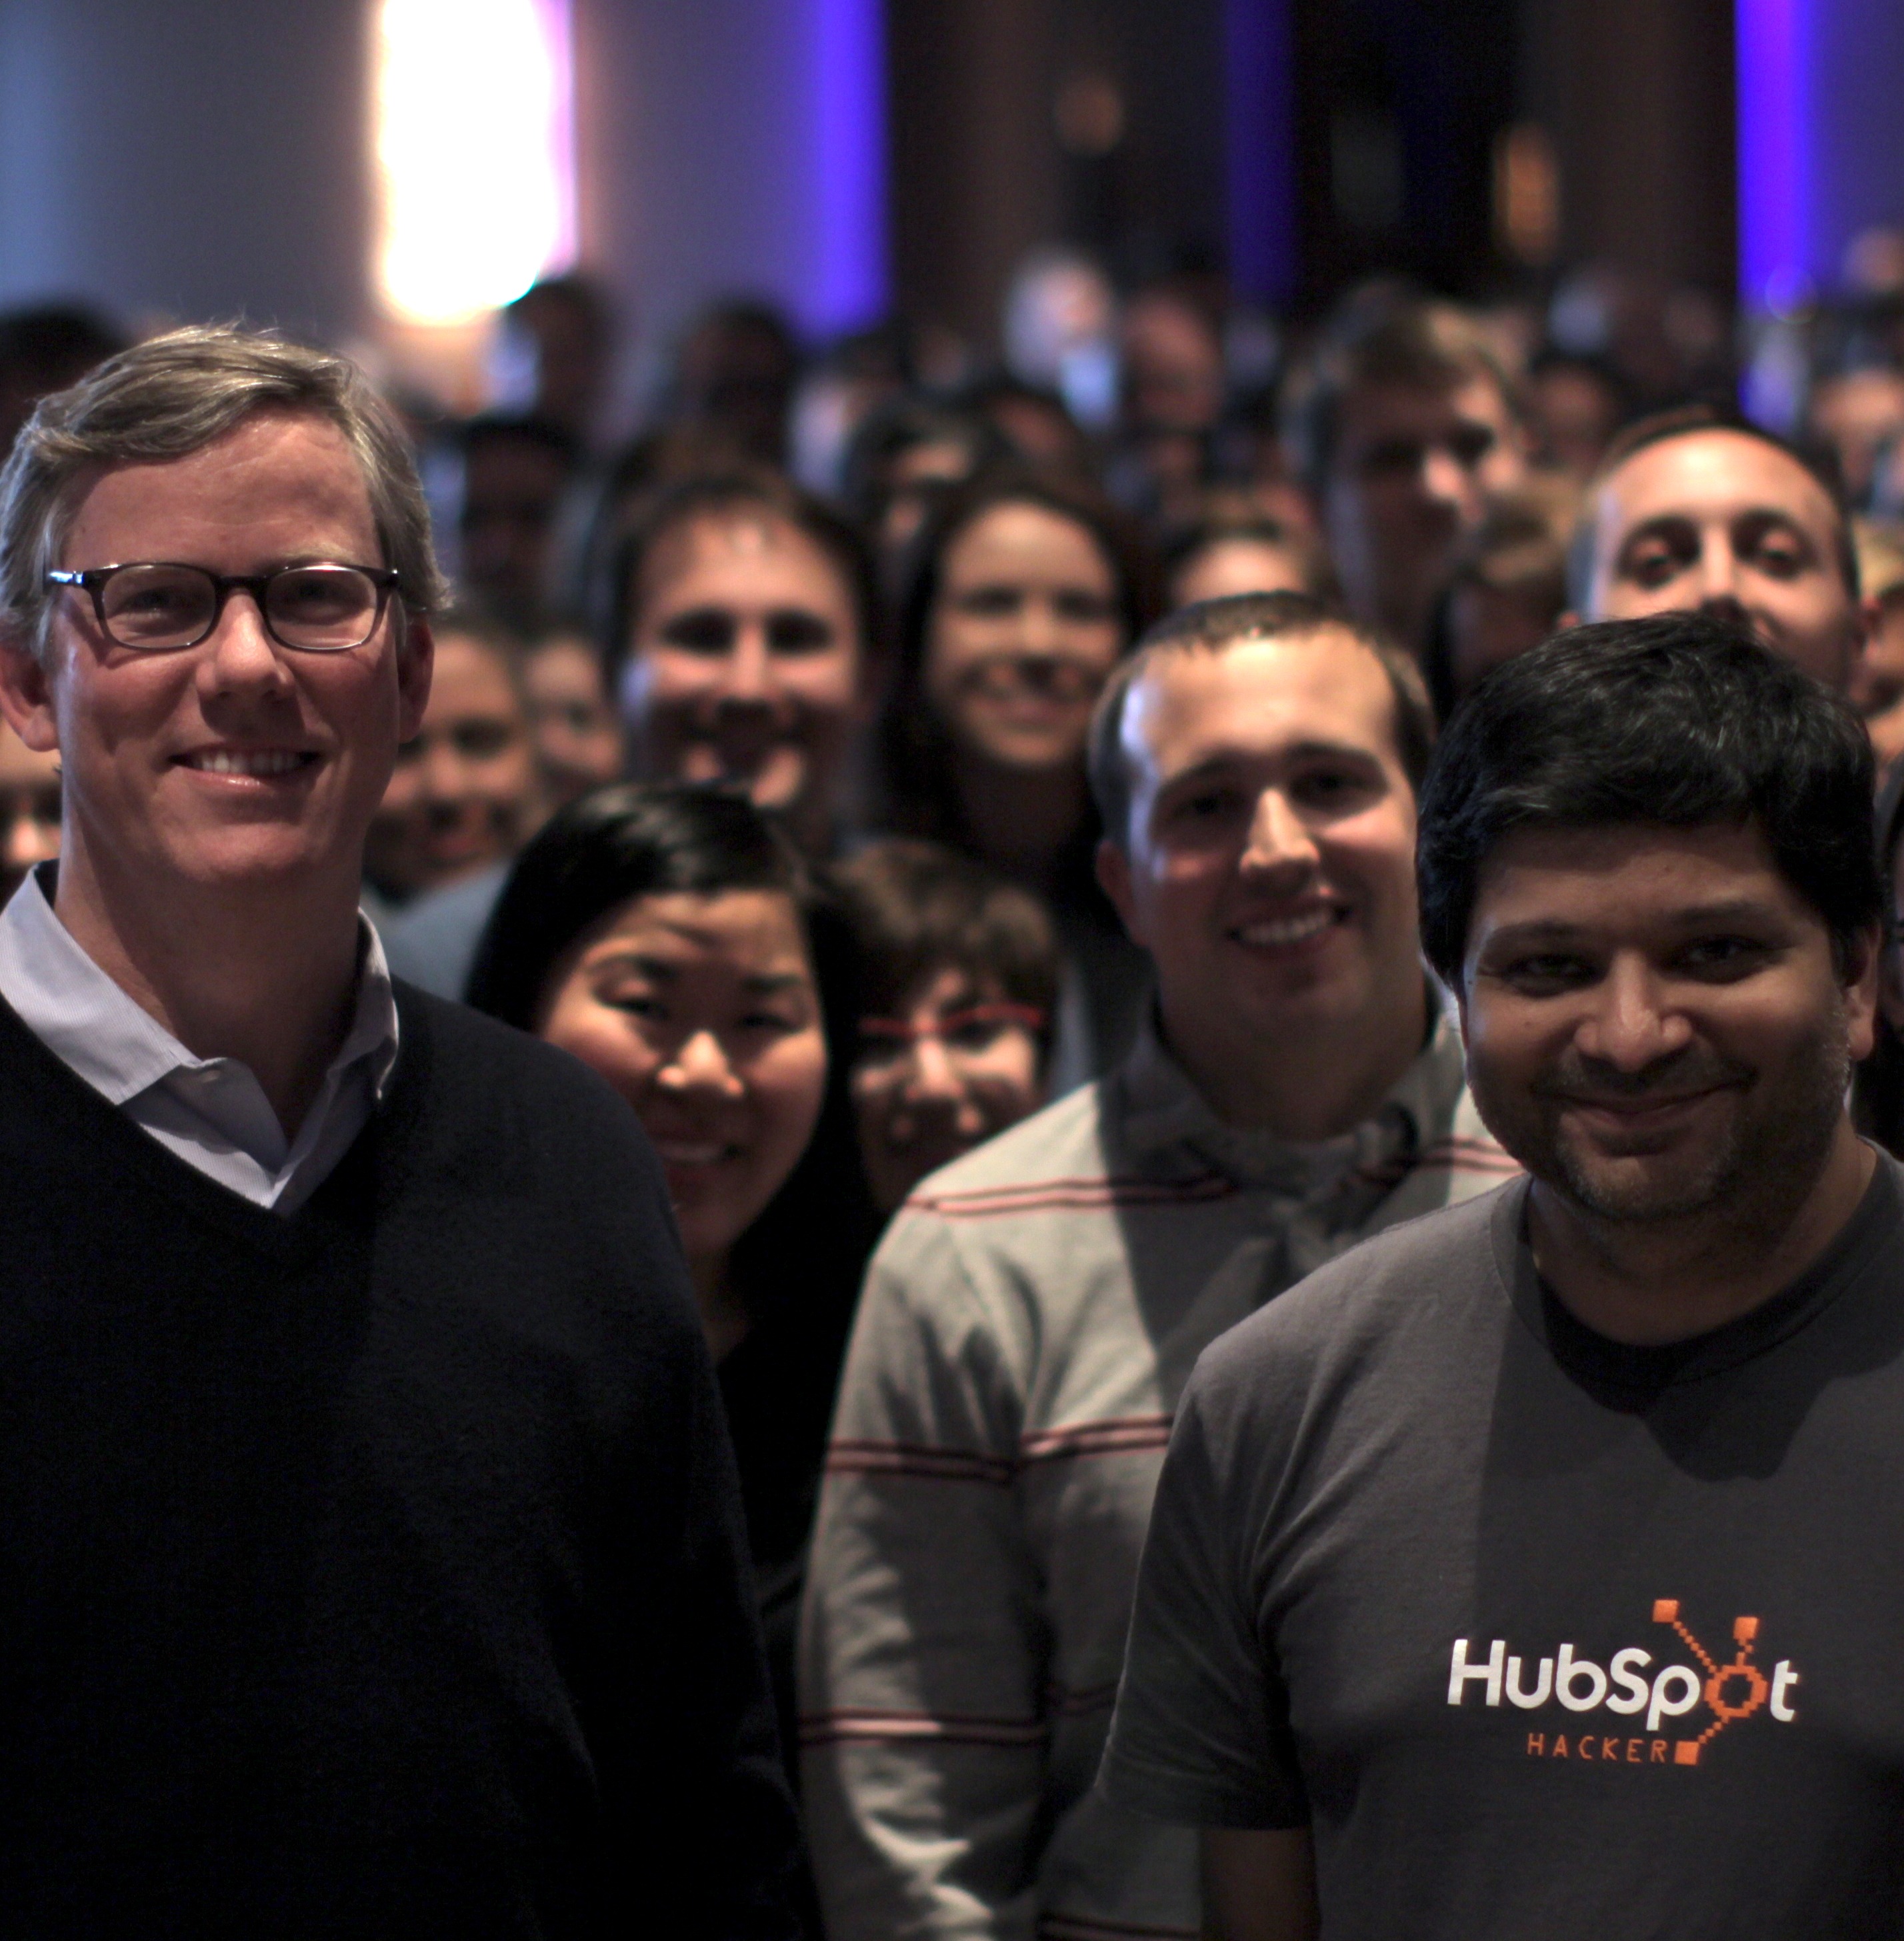 Brian Halligan and Dharmesh Shah, founders of Hubspot